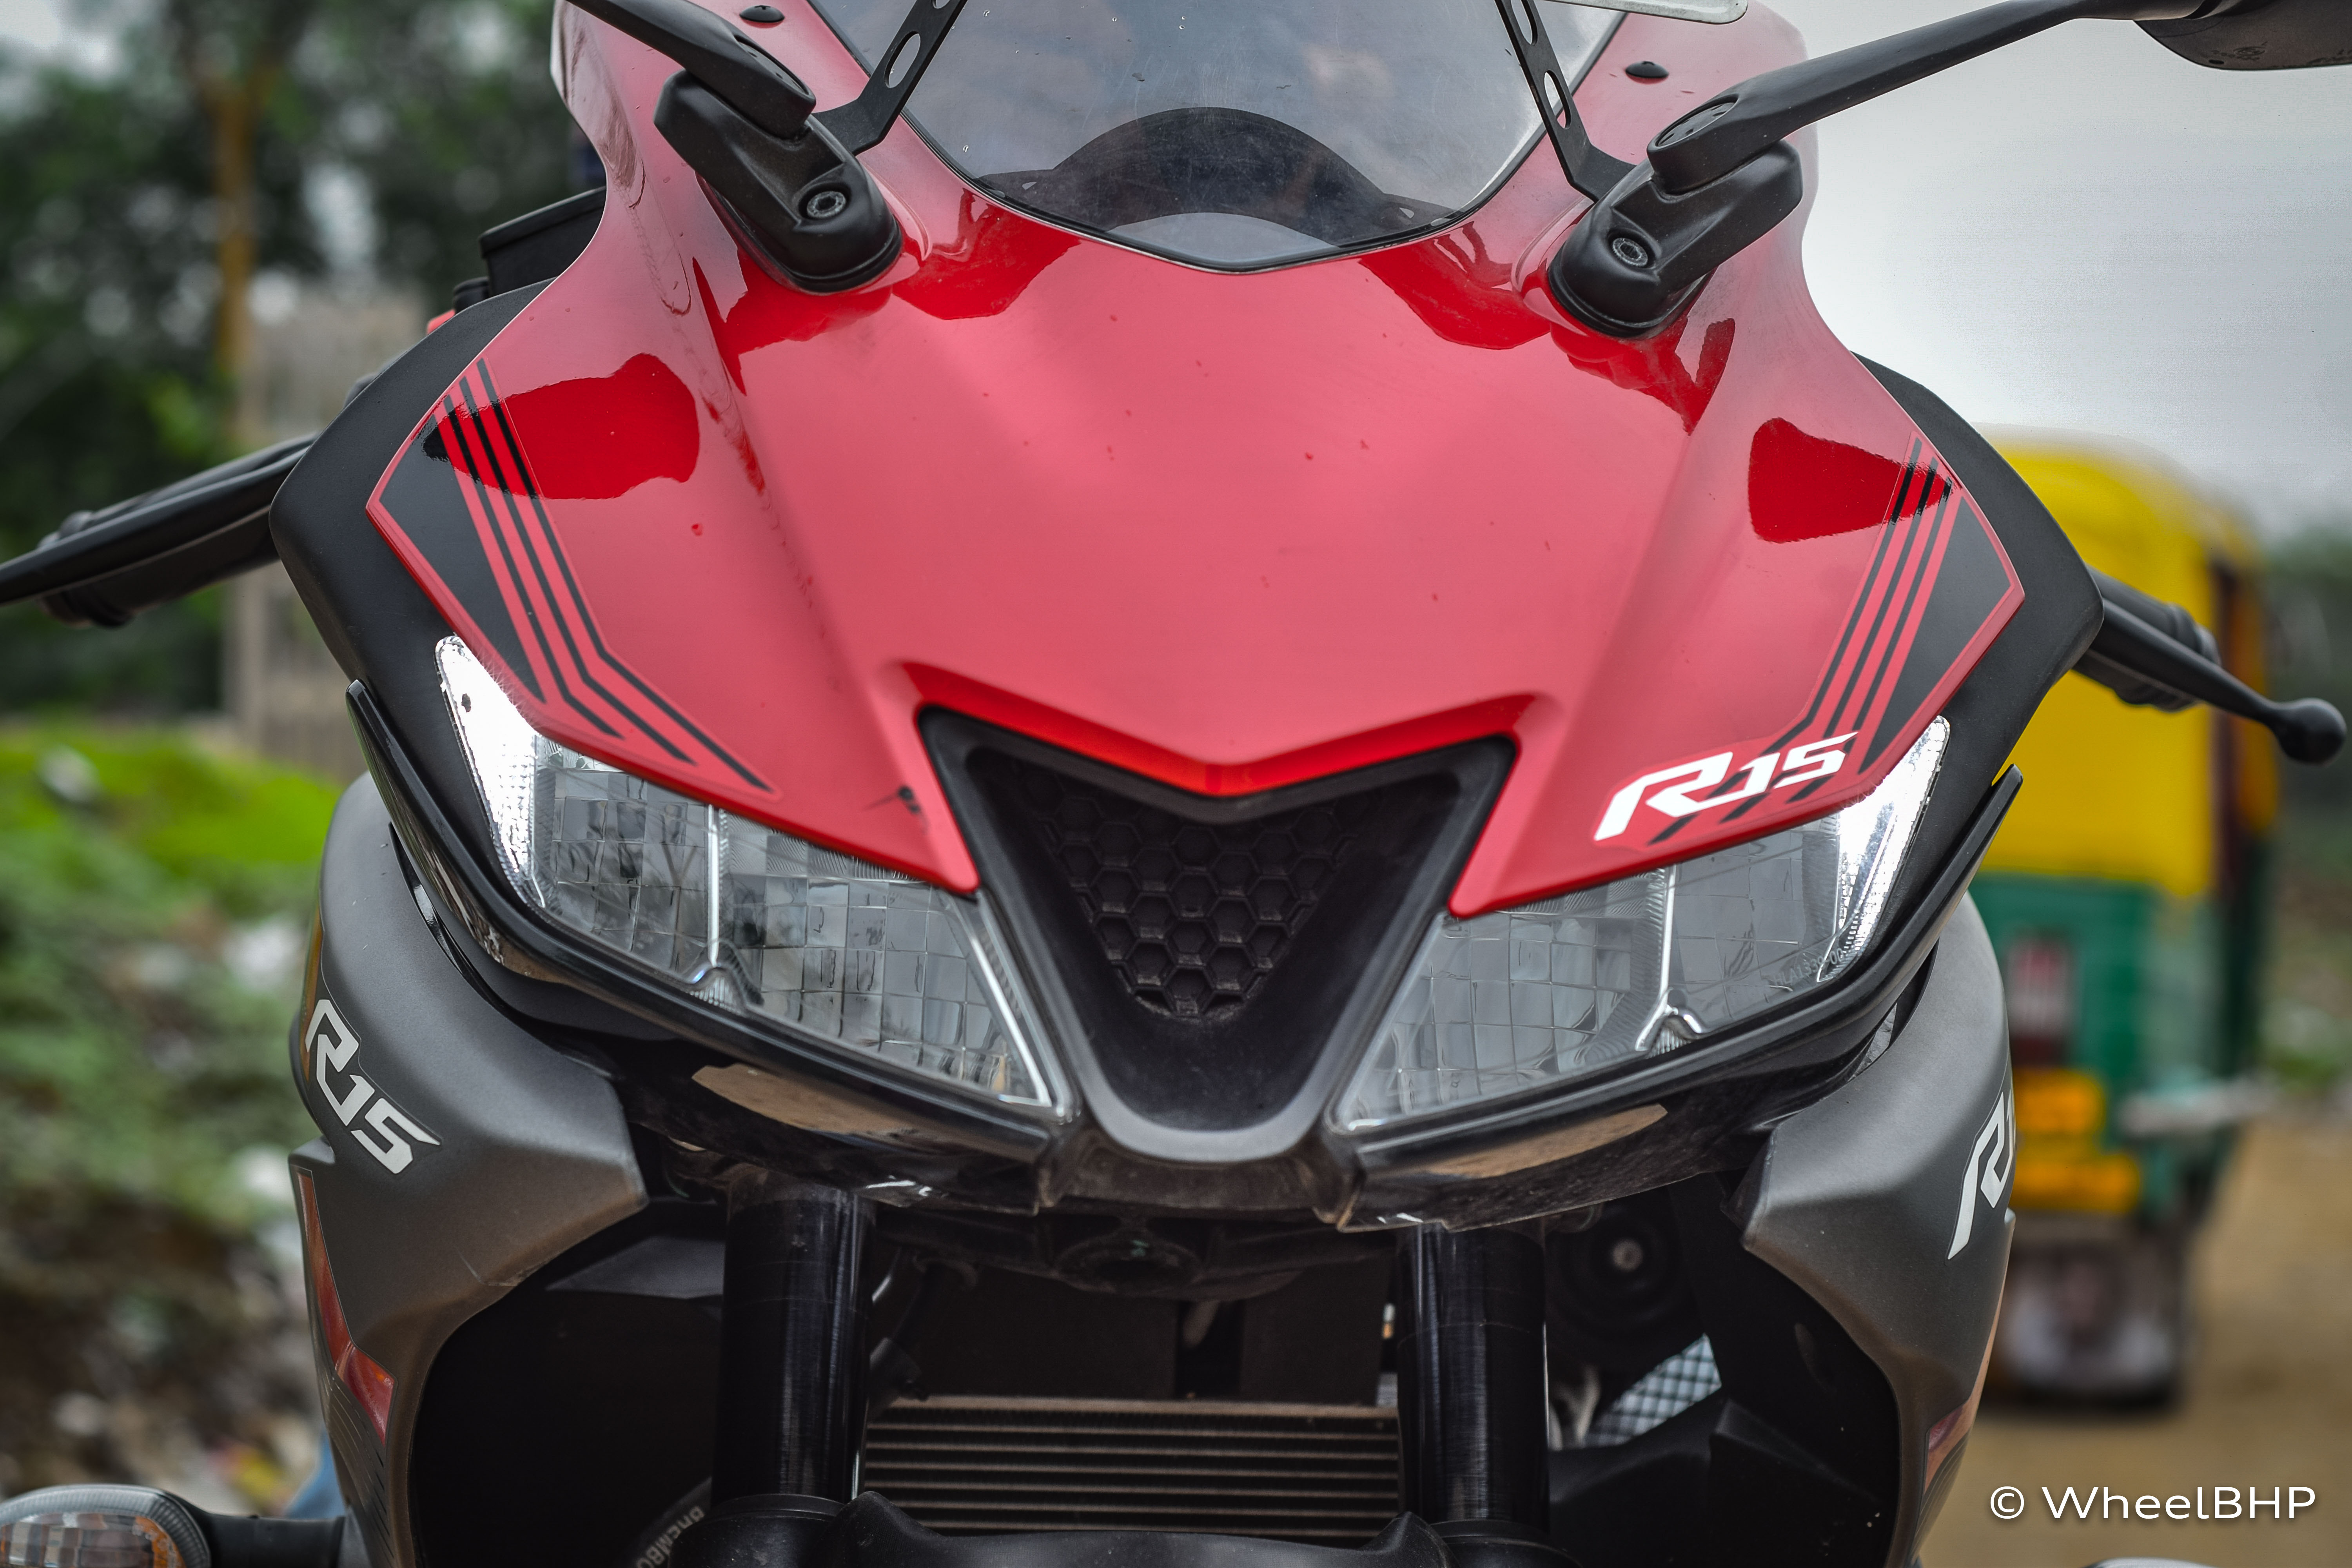 Yamaha Yzf R15 V3 First Ride Review R15 V3 Red Grey 1544469 Hd Wallpaper Backgrounds Download